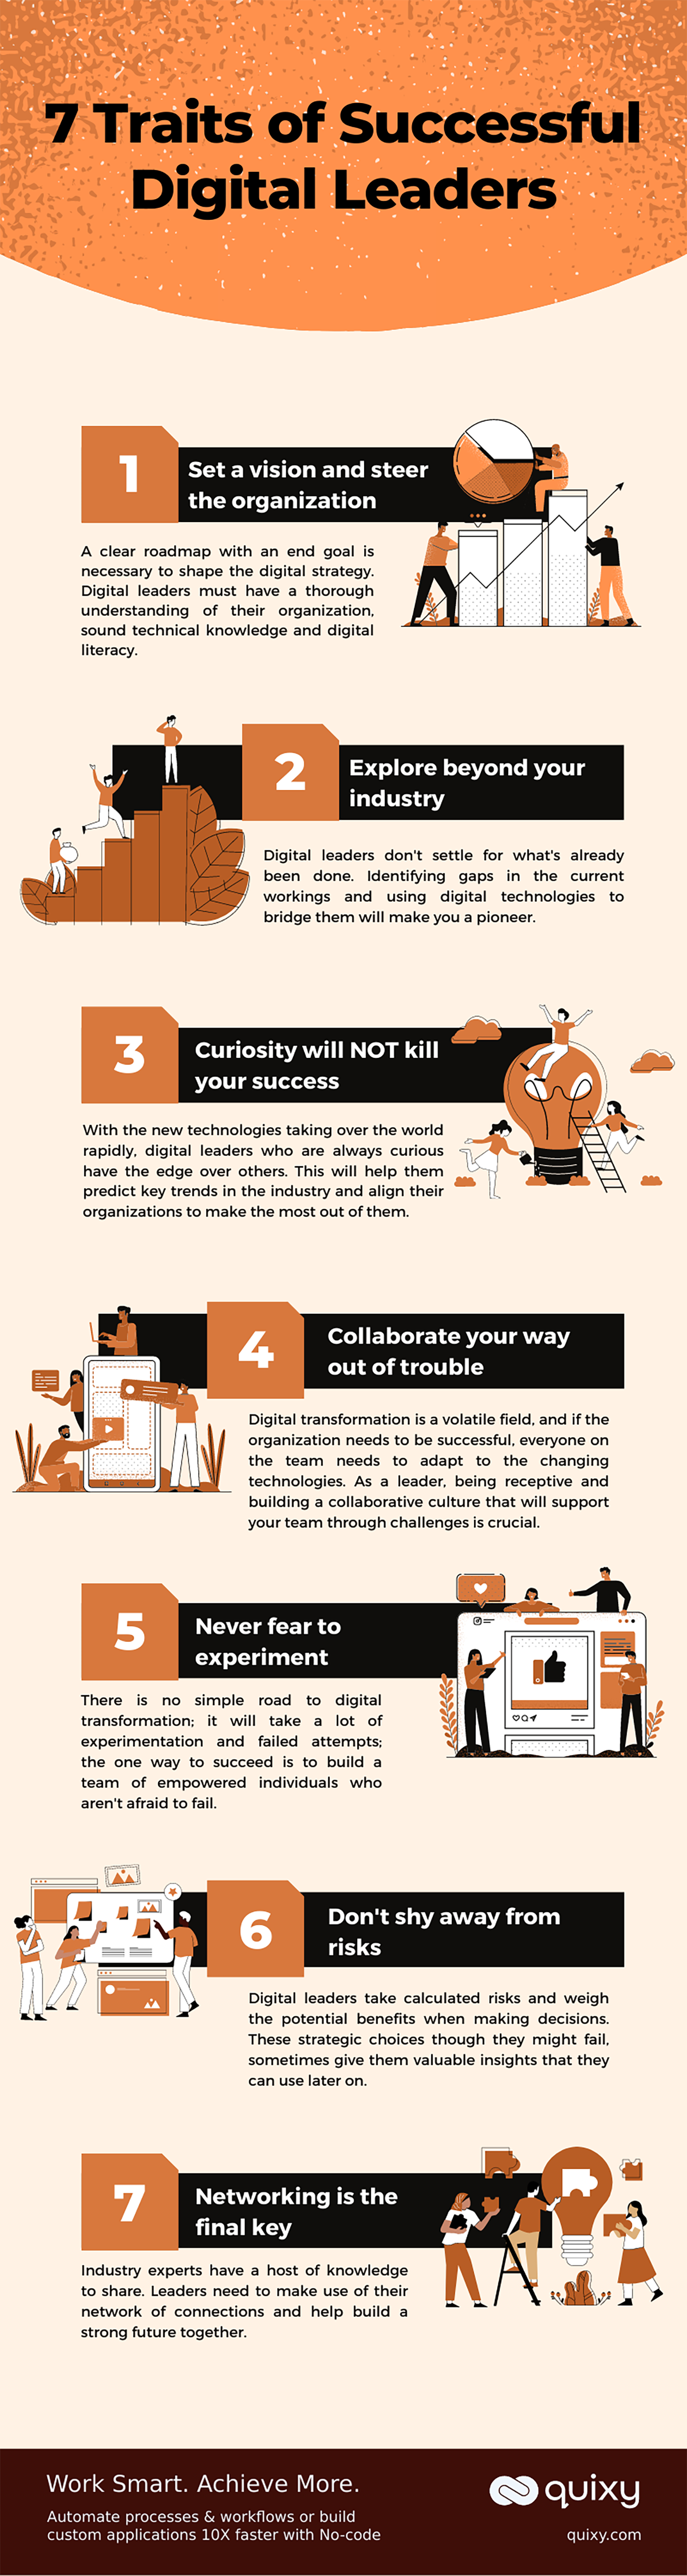 7 Traits of Successful Digital Leaders Infographic